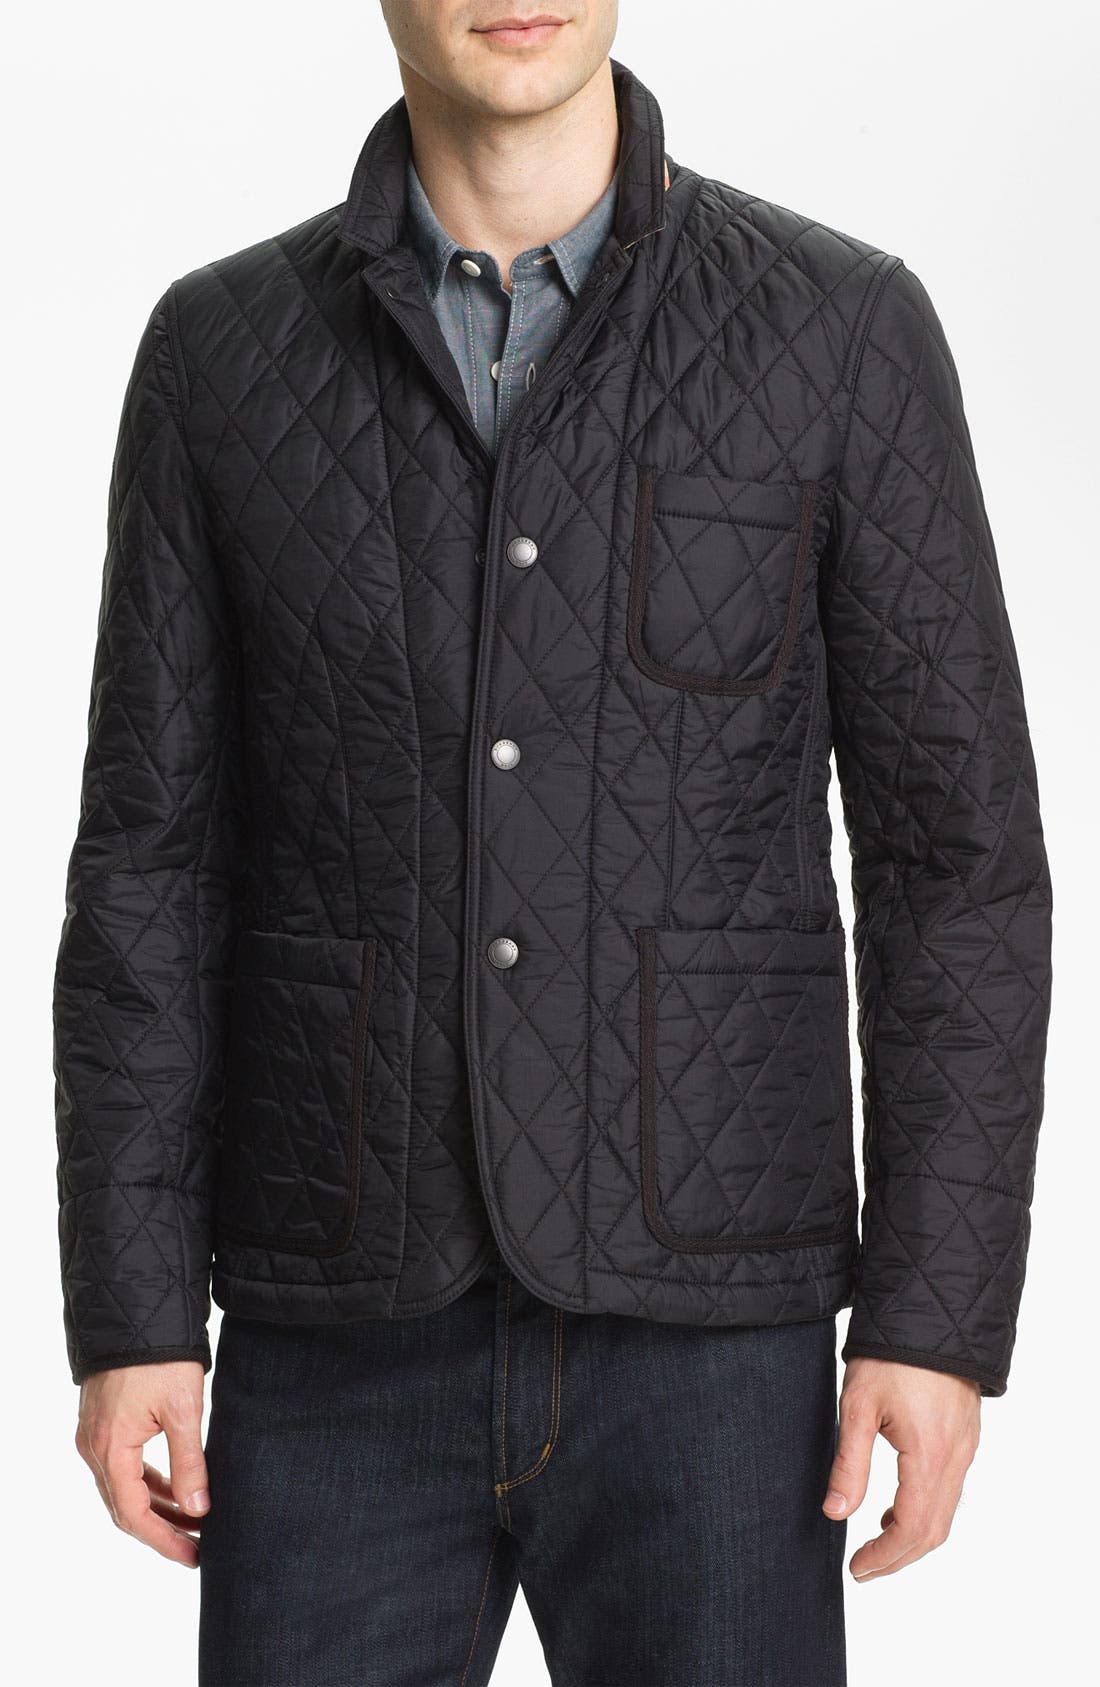 burberry quilted blazer mens